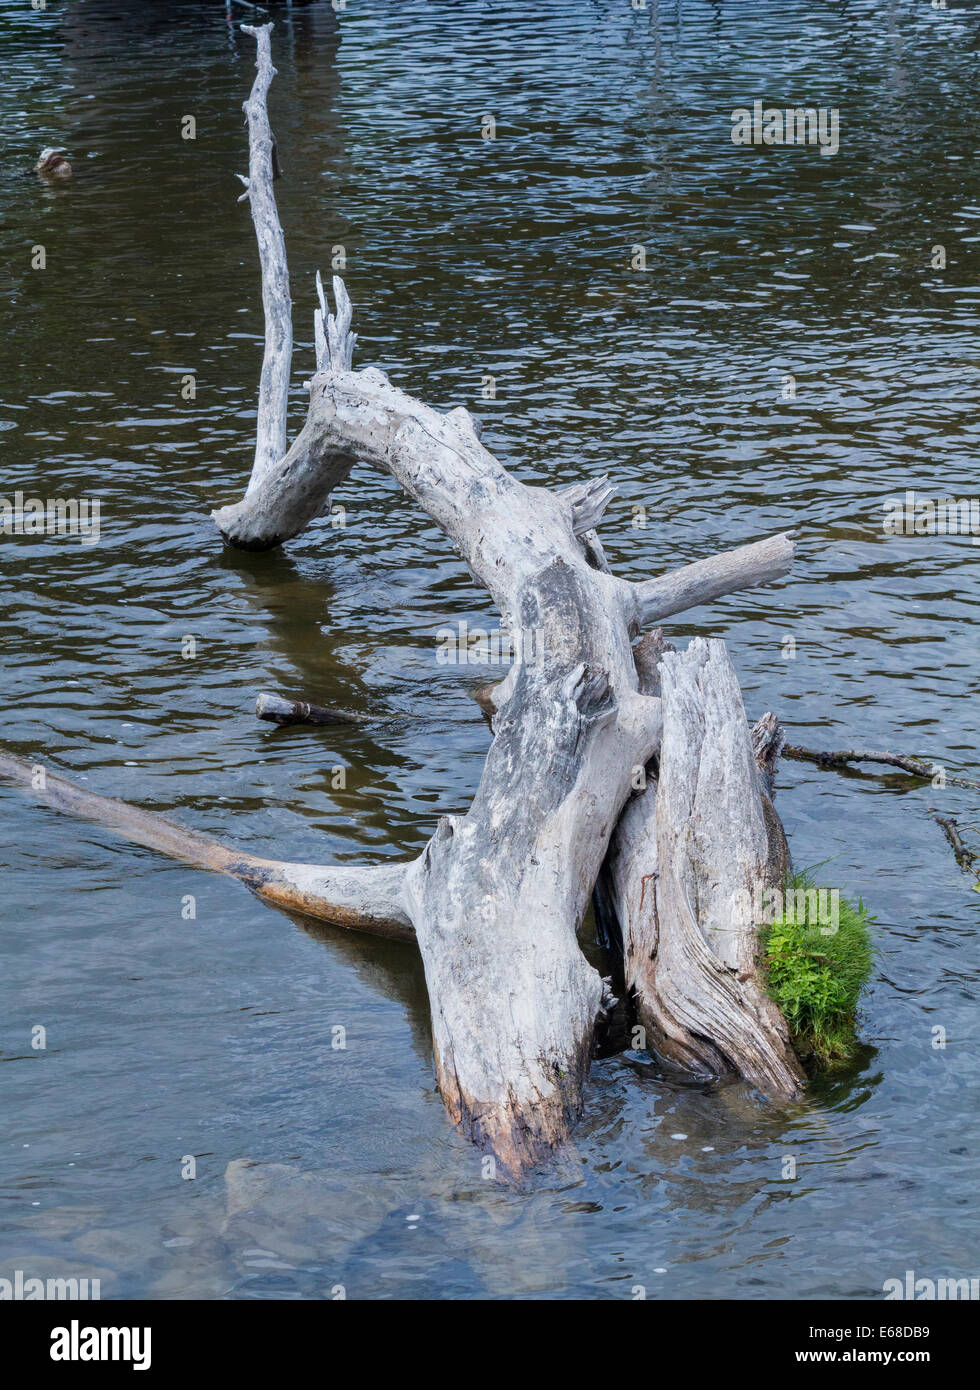 Driftwood logs protruding from the water Stock Photo